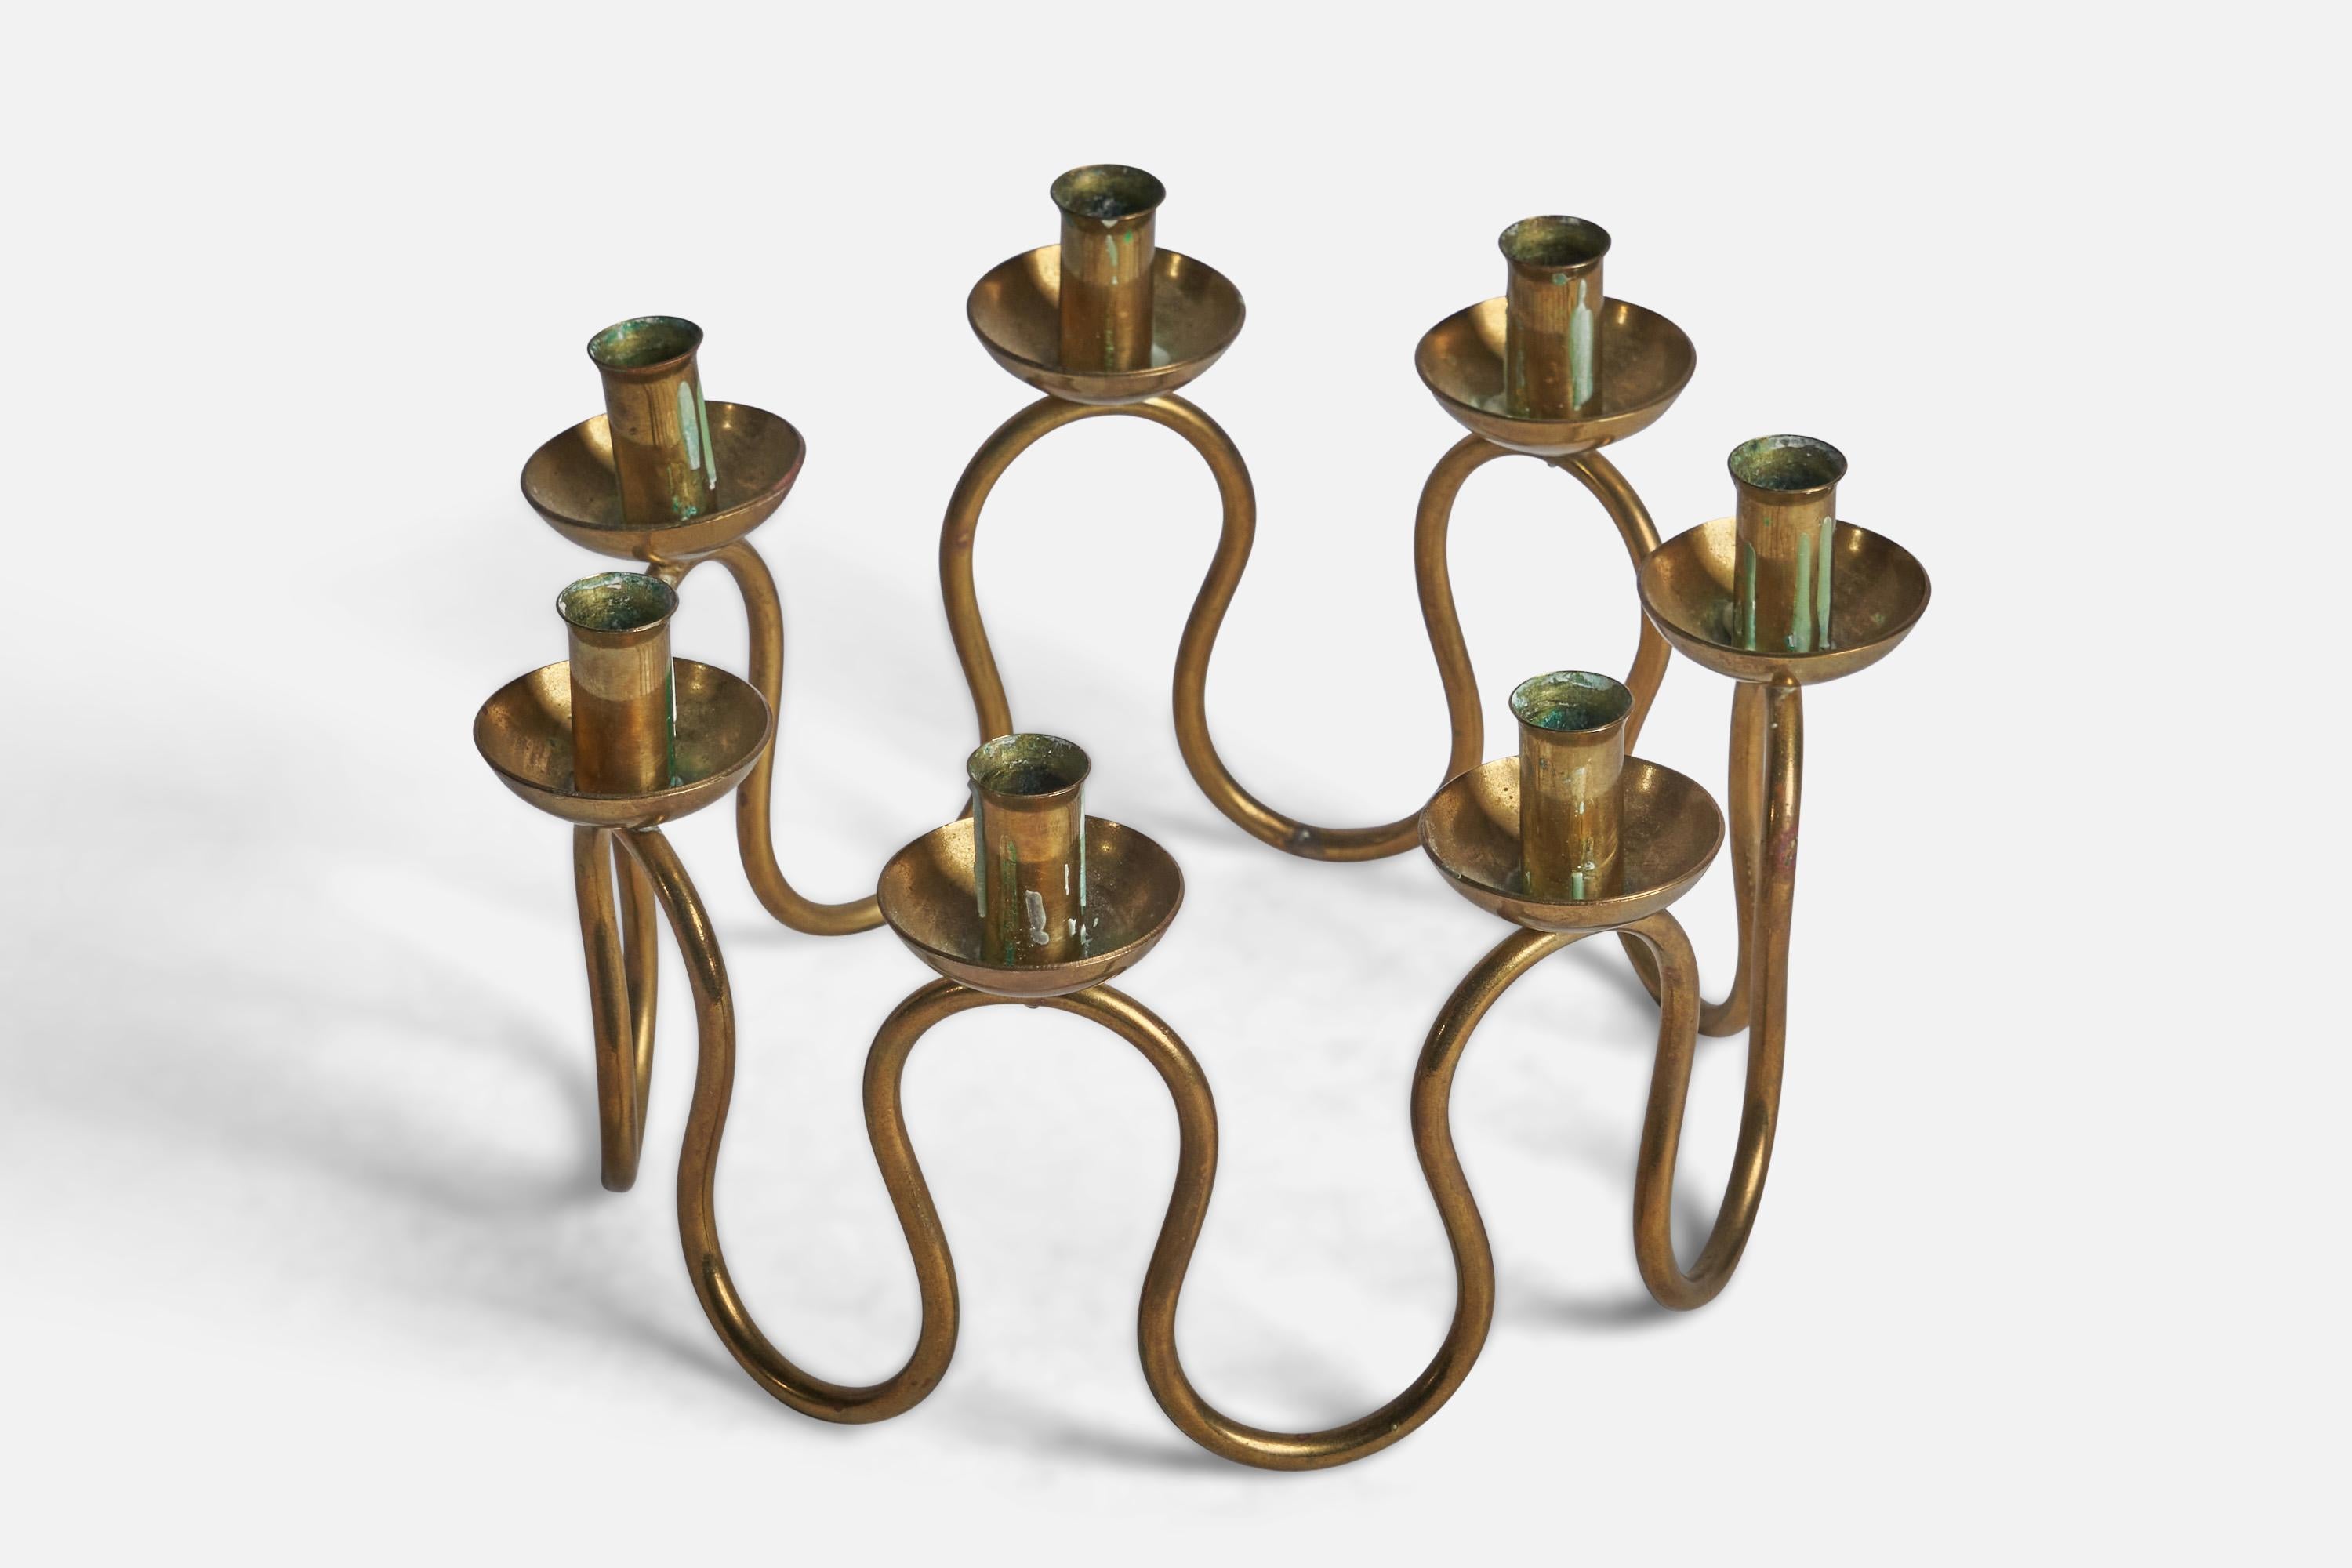 A small brass candelabra designed and produced by Lars Holmström, Sweden, 1930s.

Holds 0.5” diameter candles